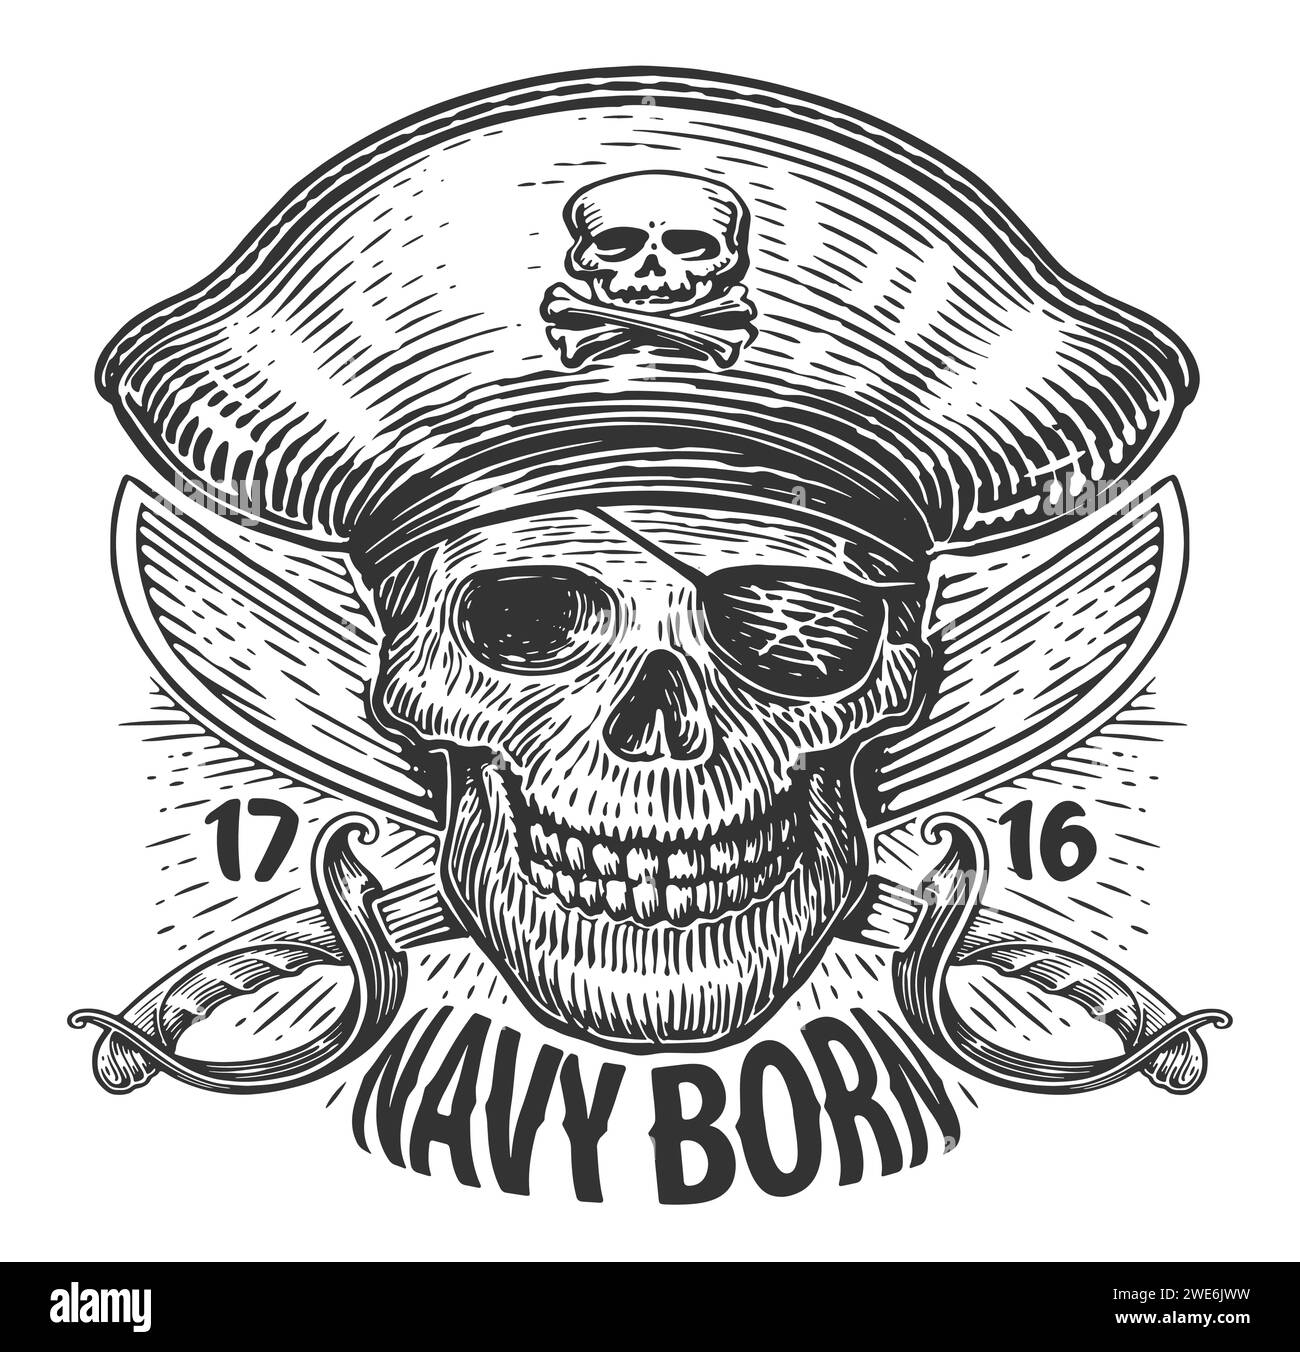 NAVY BORN. Skull and crossed sabers. Jolly Roger, skeleton pirate vintage vector illustration Stock Vector